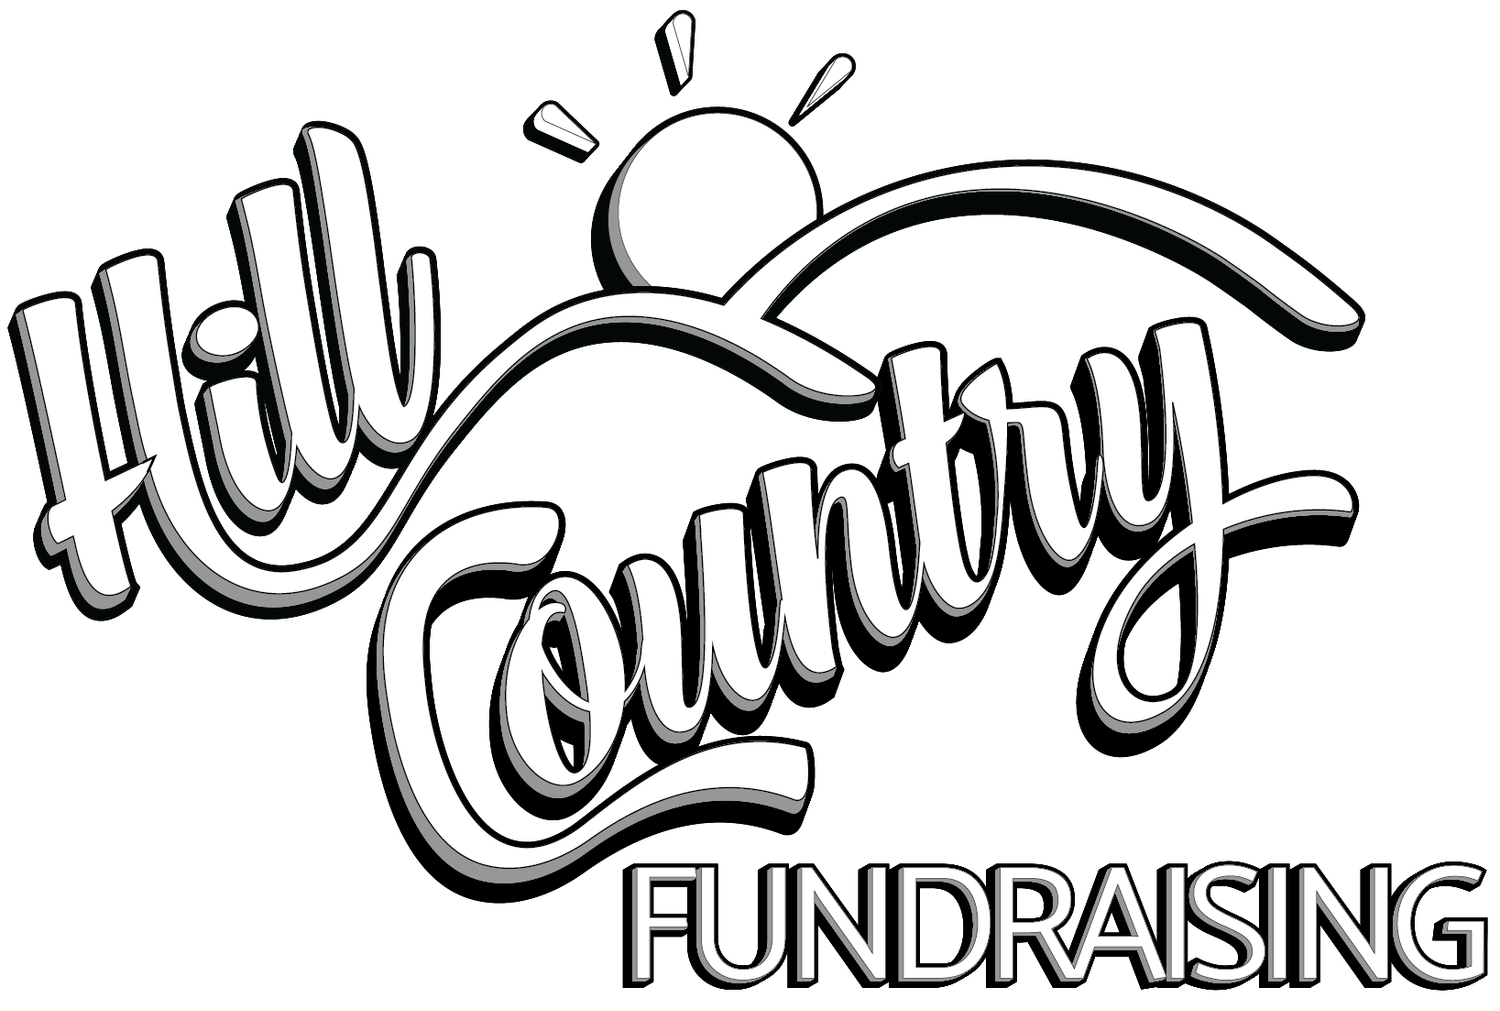 Hill Country Fundraising